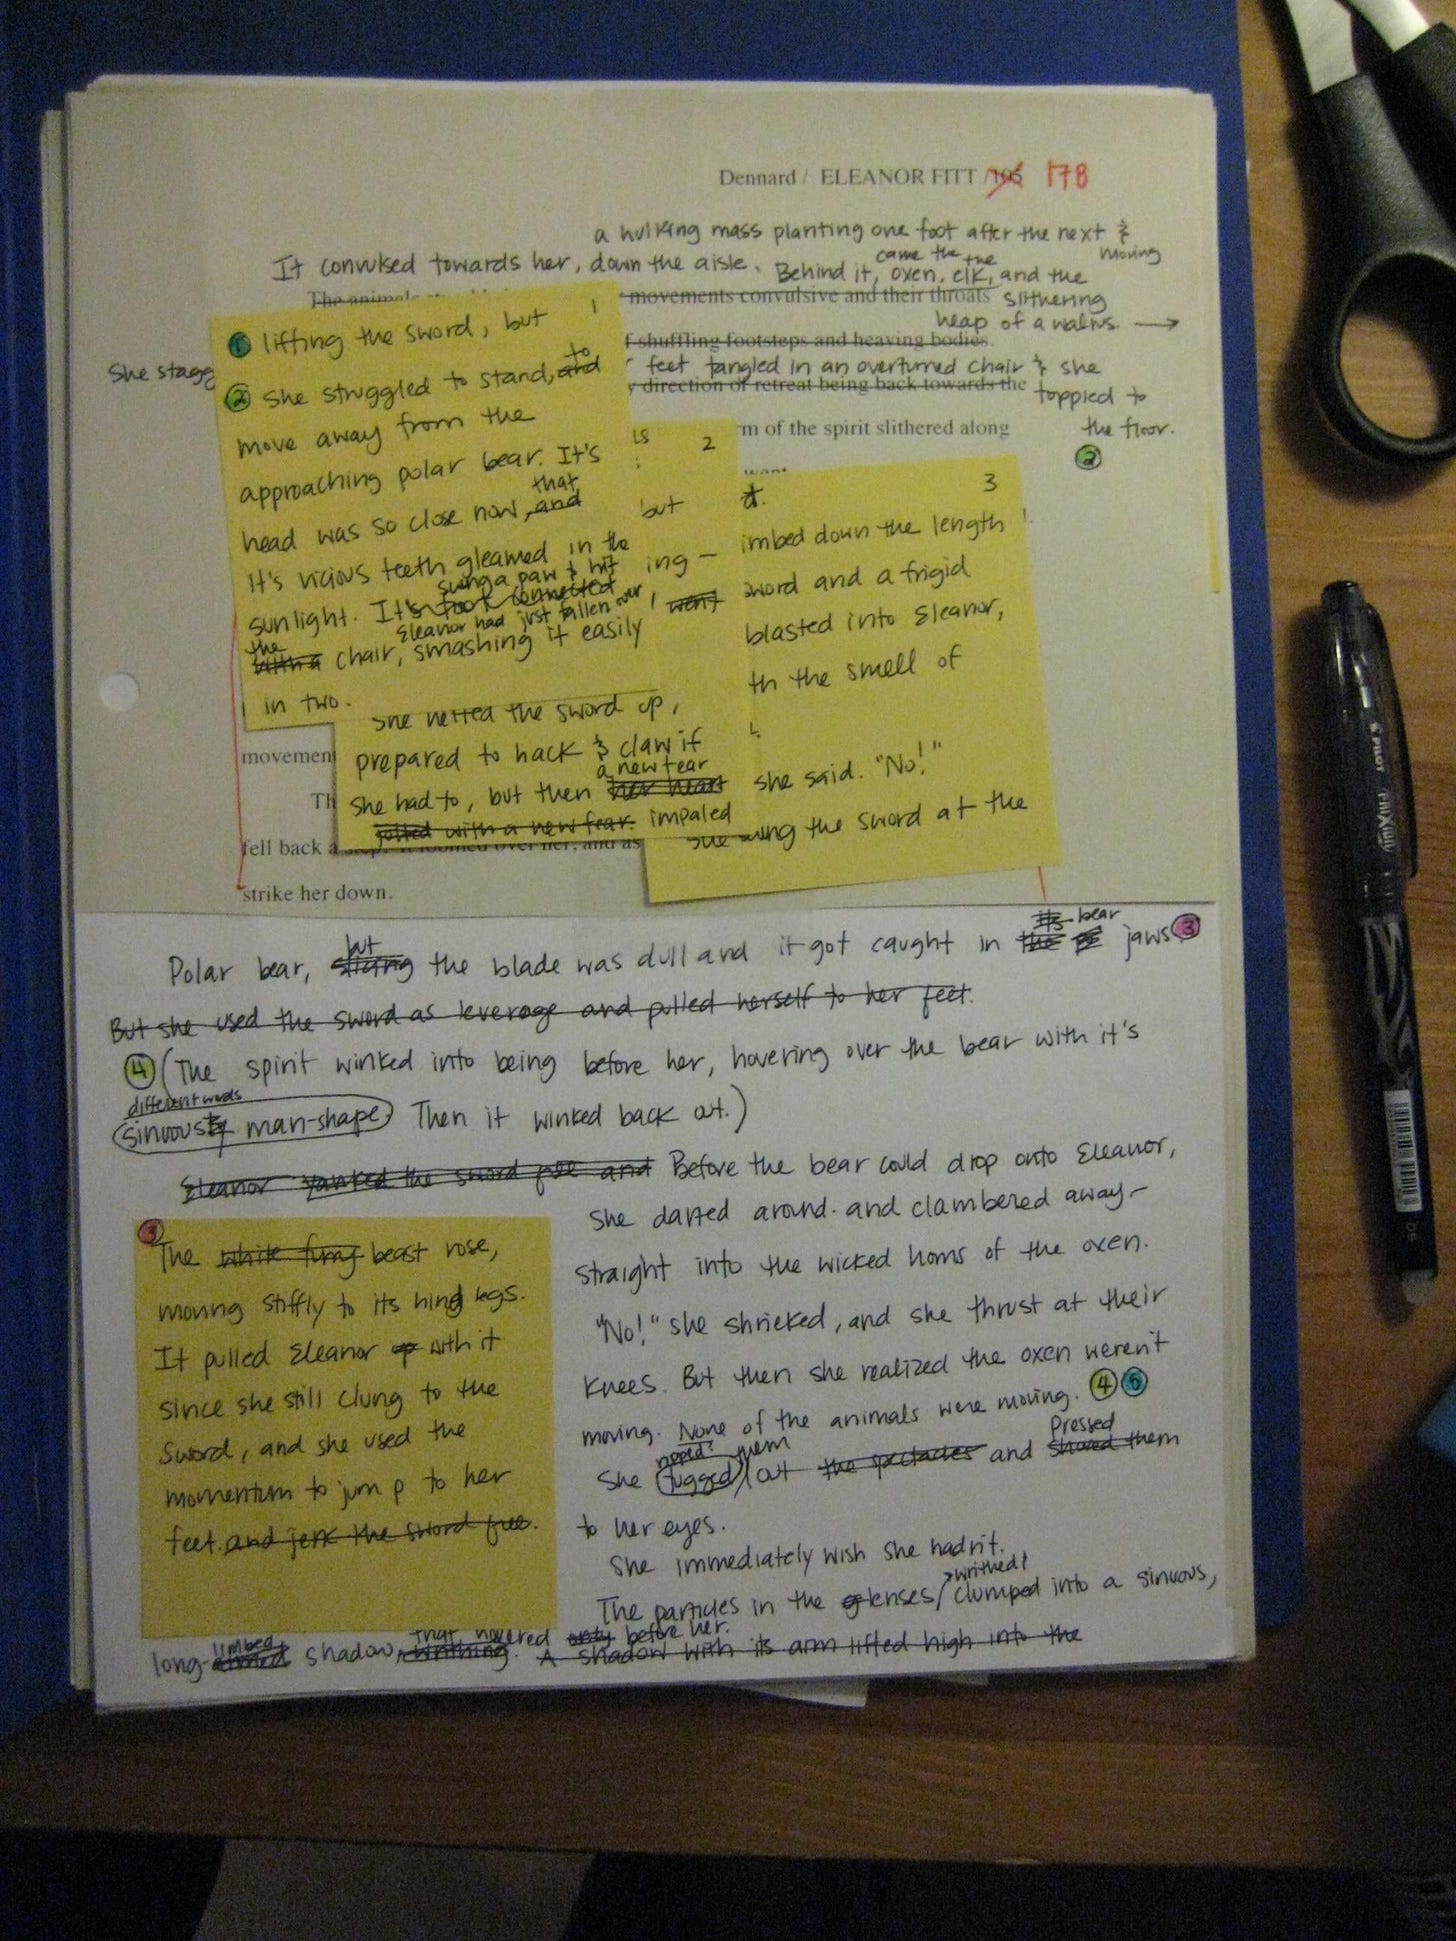 A photo of Susan's first developmental edit for her debut novel, all done by hand. The image shows a single page with post its, handwritten changes to the text, and literal cut-outs of other pages pasted onto this one. It's a mess! But this is how she learned.